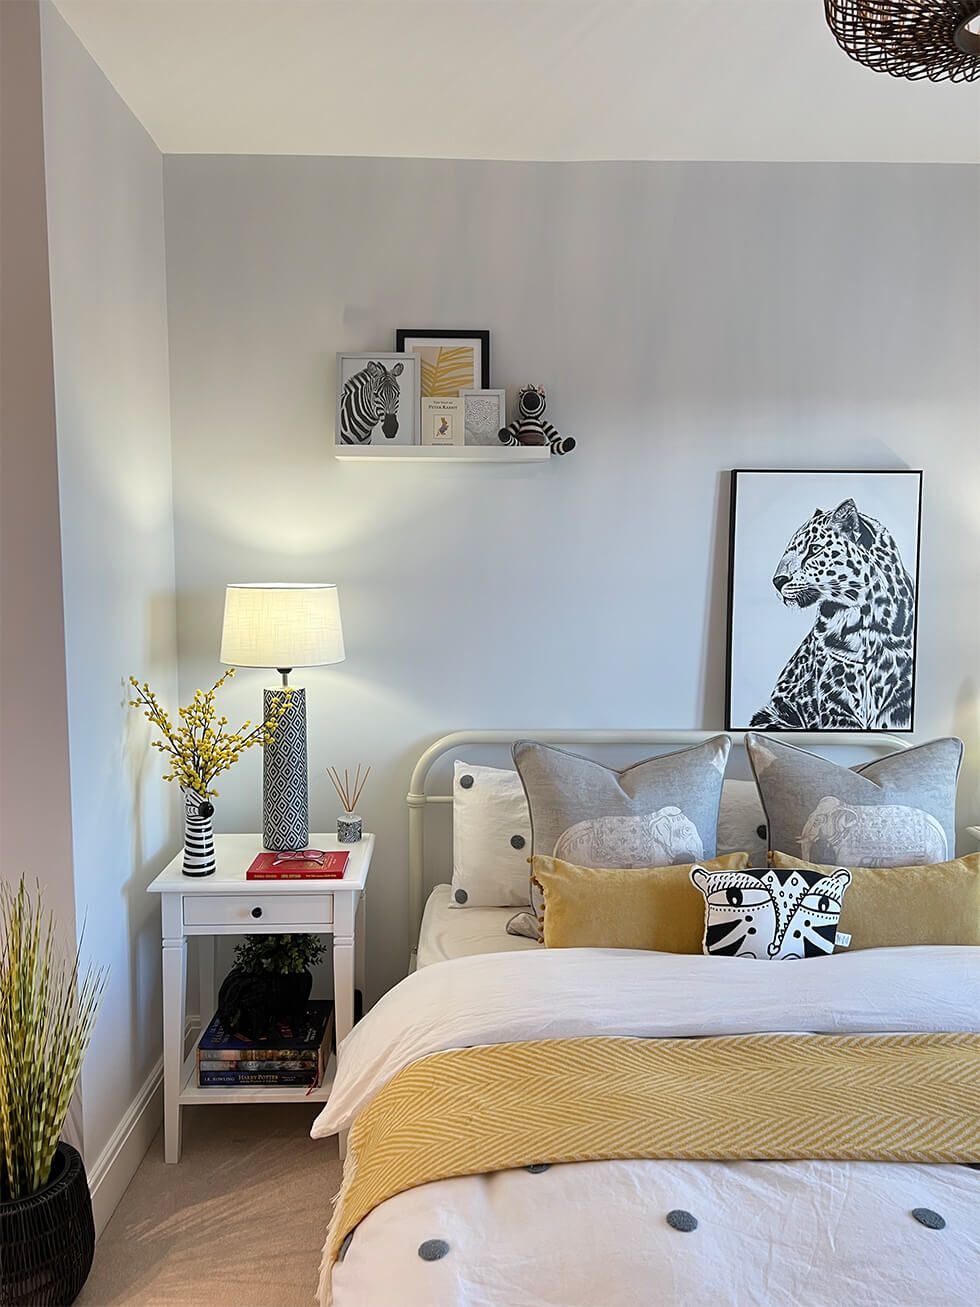 Safari themed bedroom with animal accessories